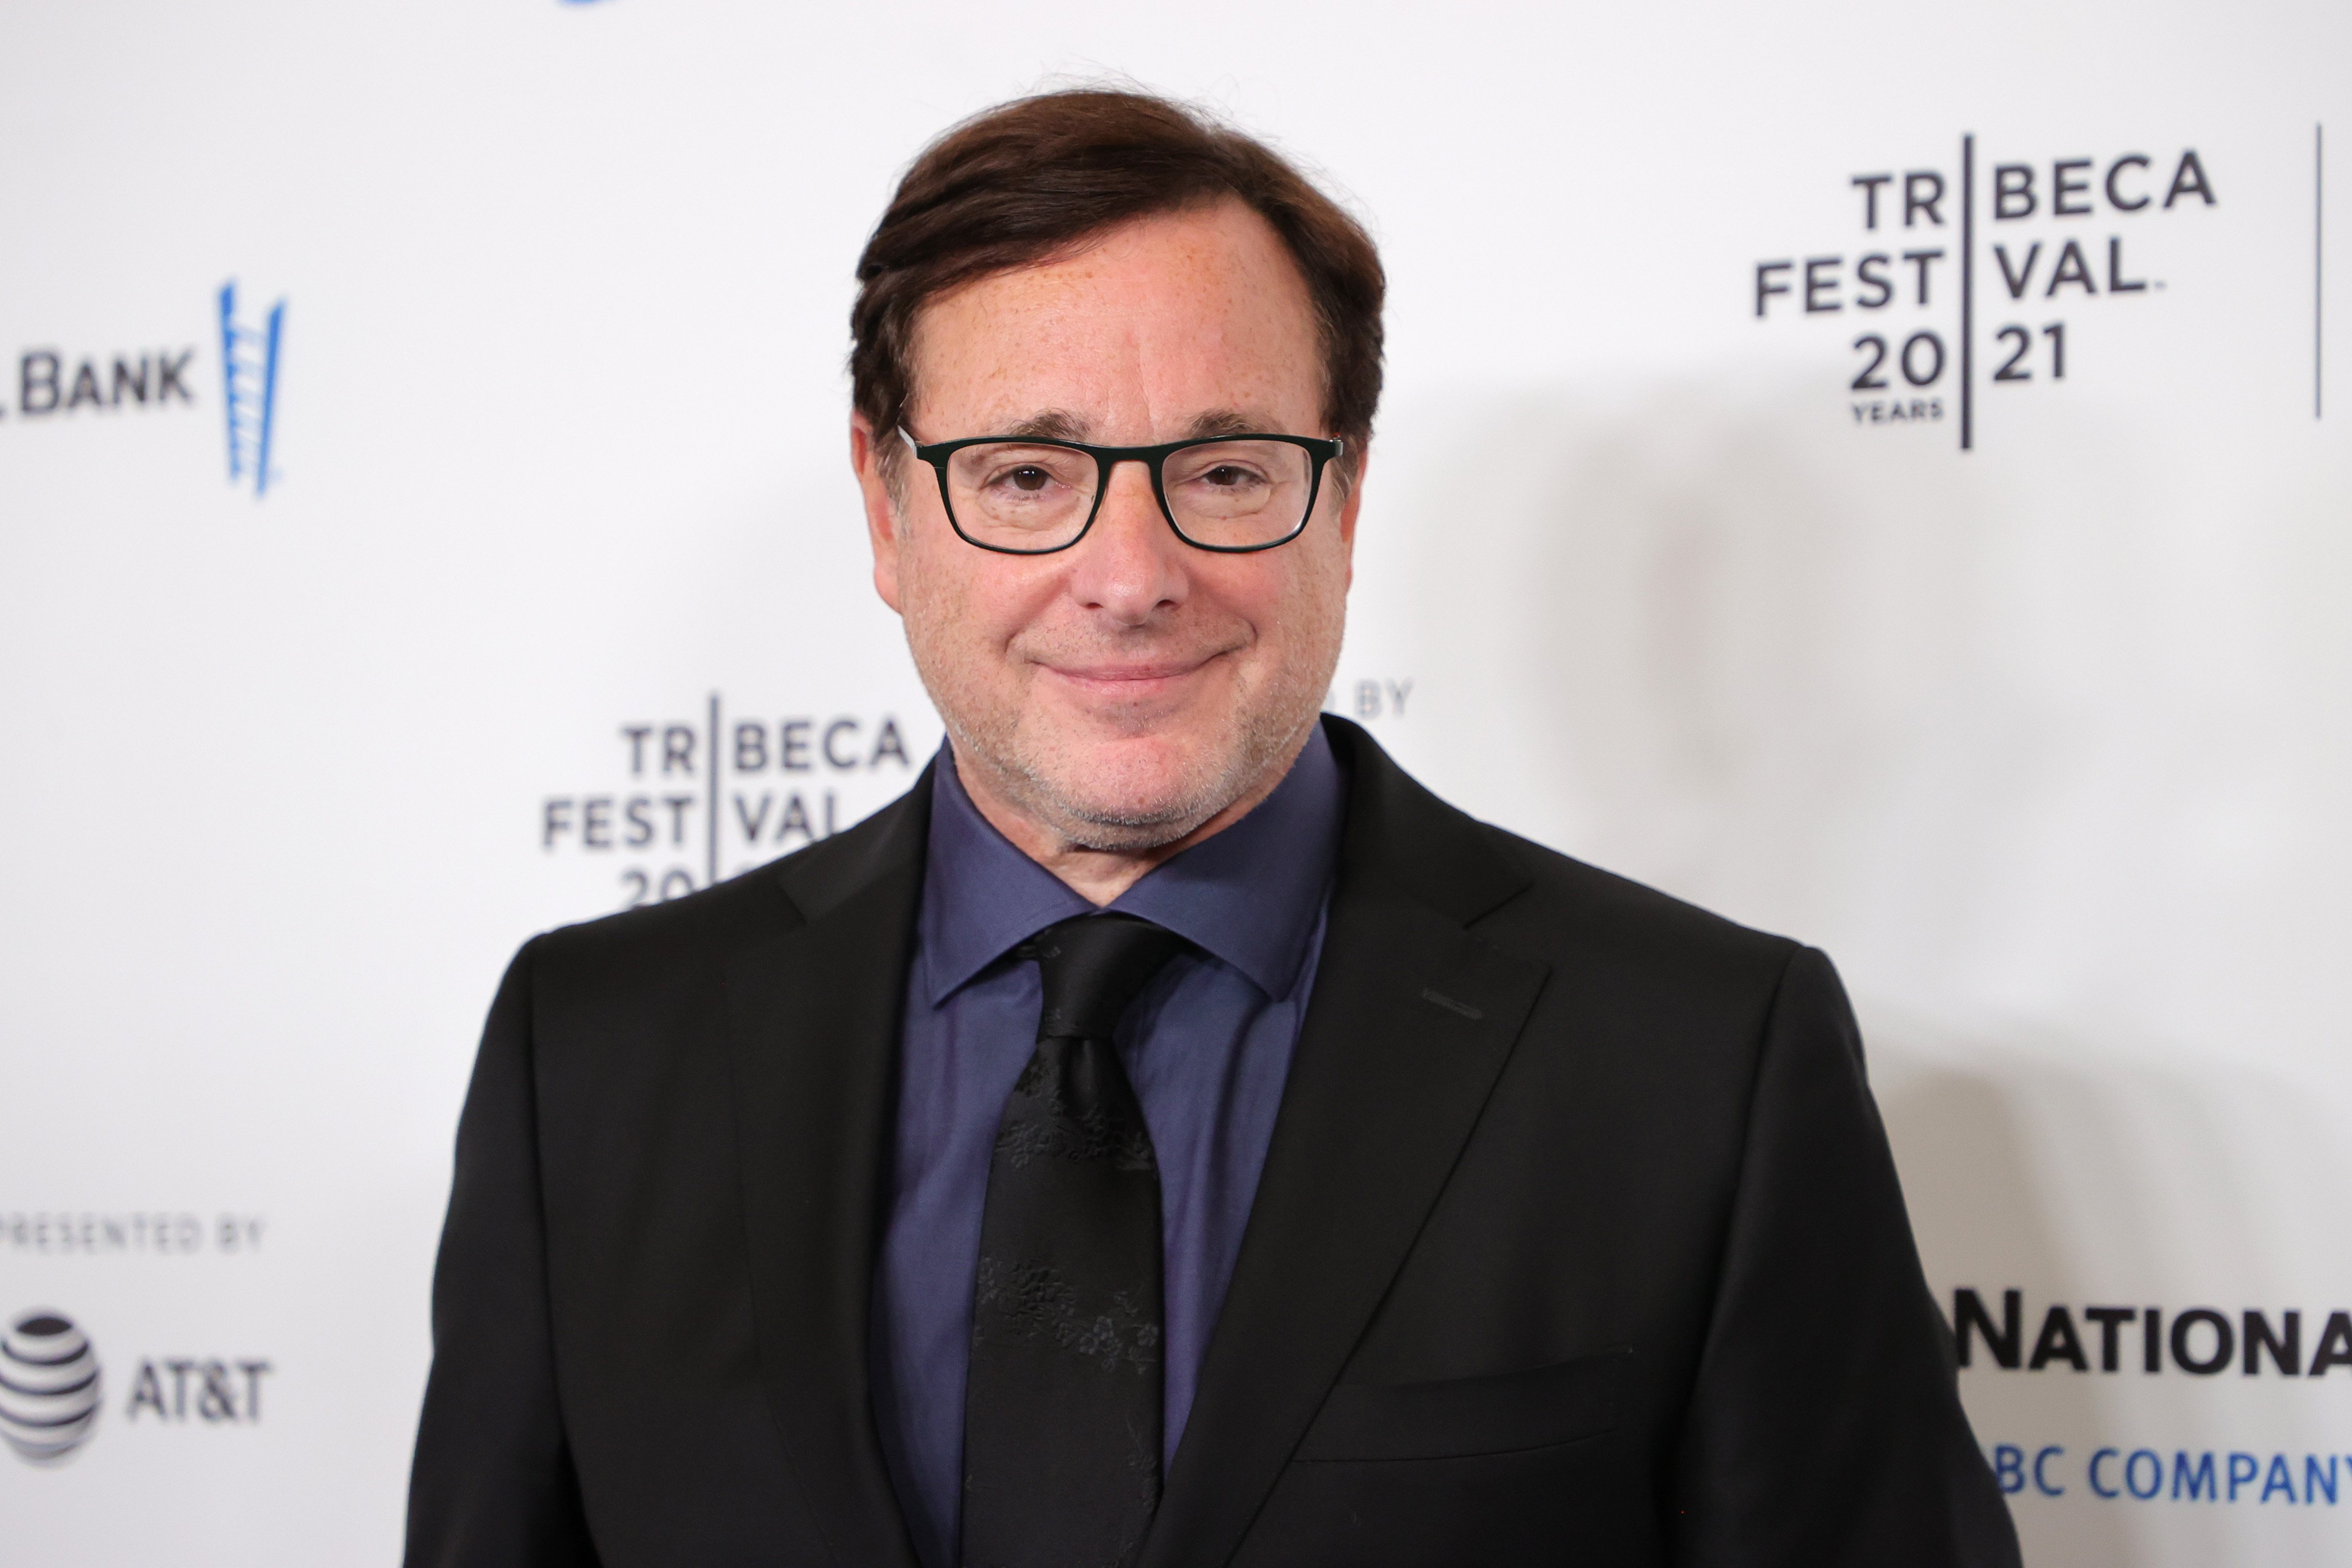 Bob Saget at the premiere of "Untitled: Dave Chappelle Documentary" at the Tribeca Festival on June 19, 2021 | Source: Getty Images